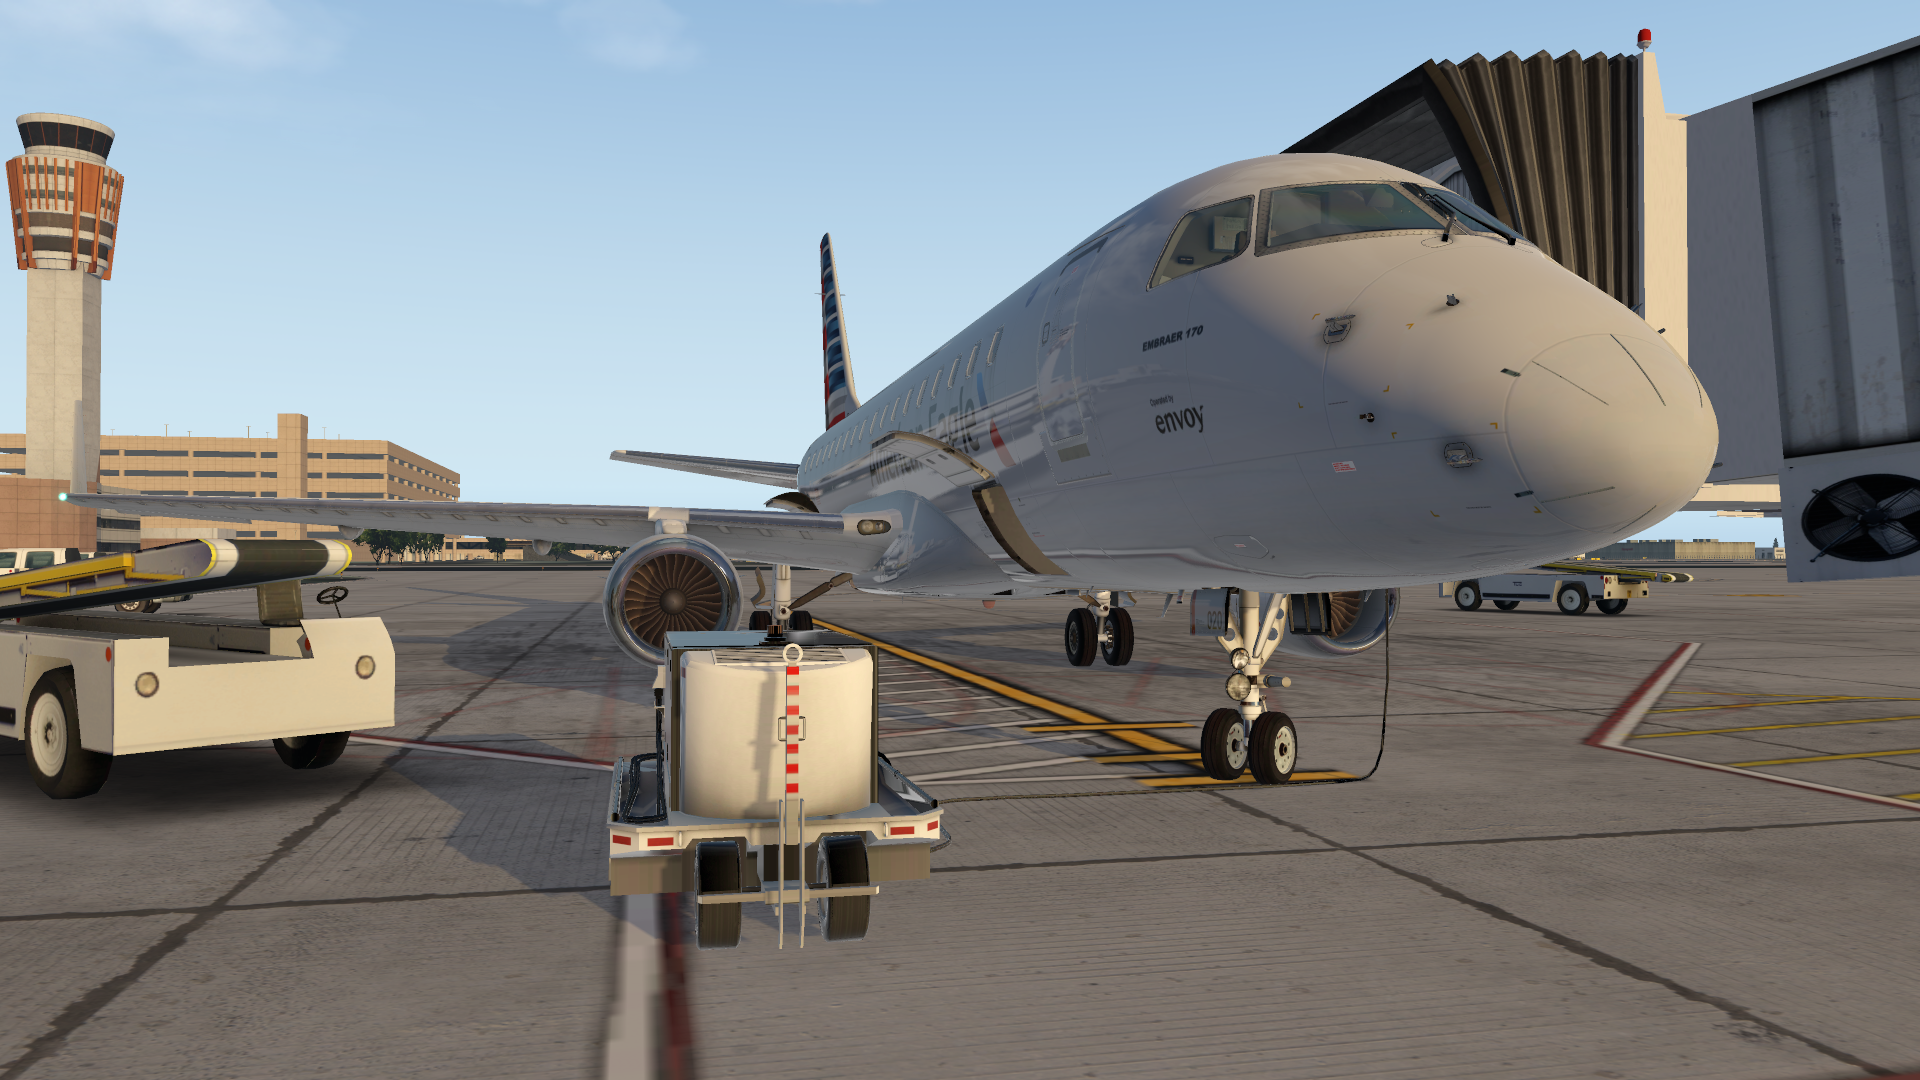 SSG Releases a Minor Update for their E-Jets - SSG, X-Plane